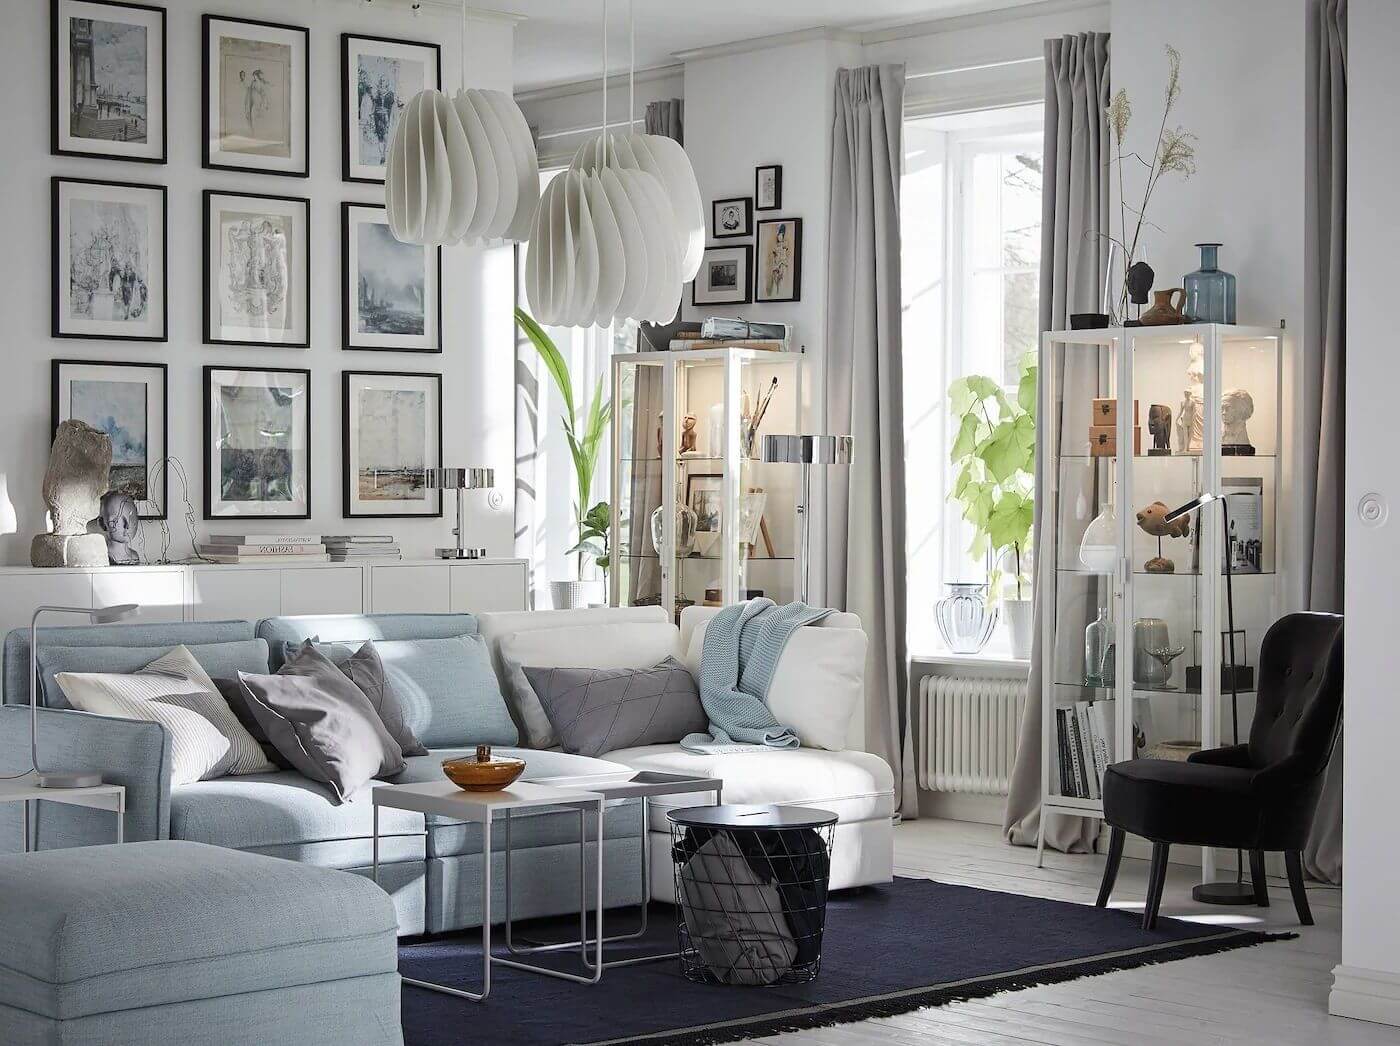 A gray living room that takes on color3 (1)